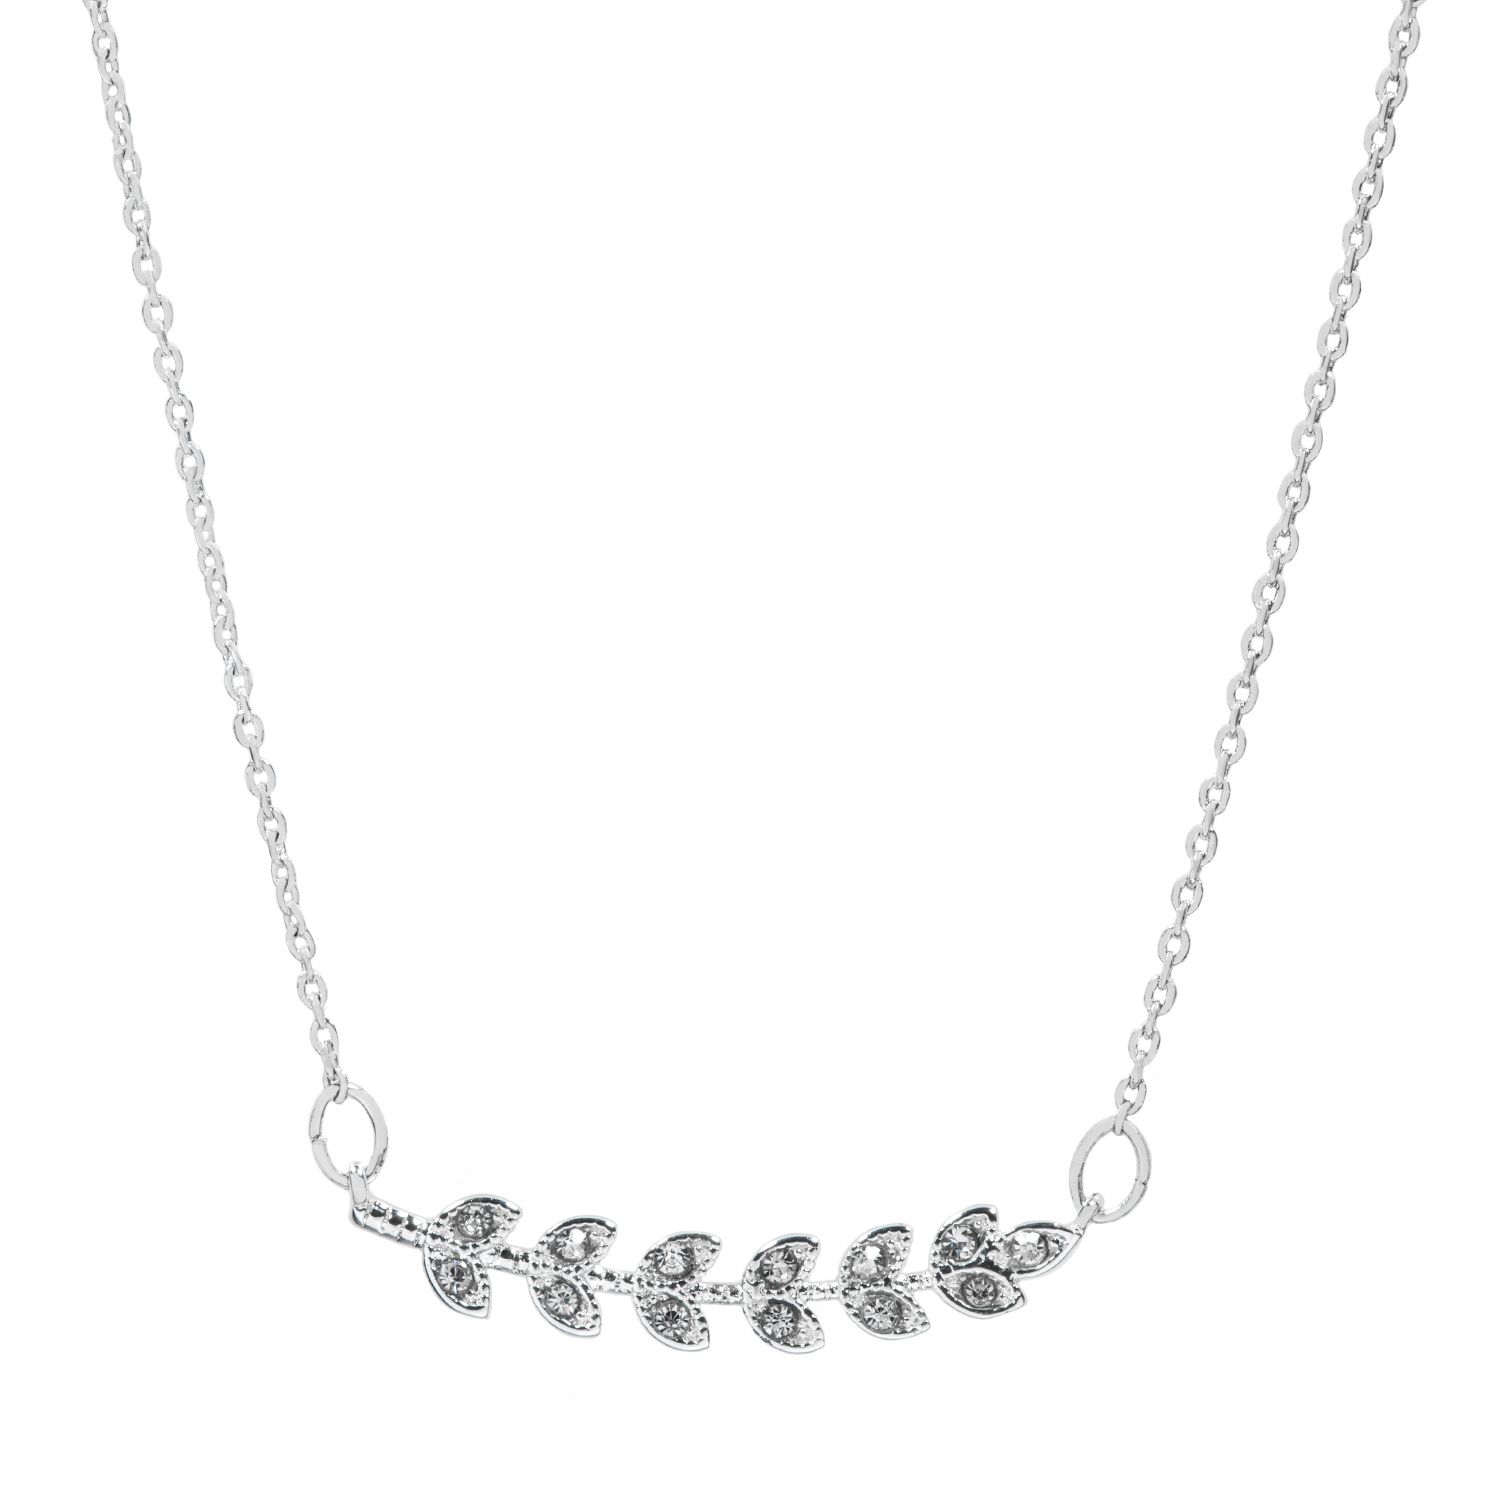 Image for LC Lauren Conrad Branch Necklace at Kohl's.